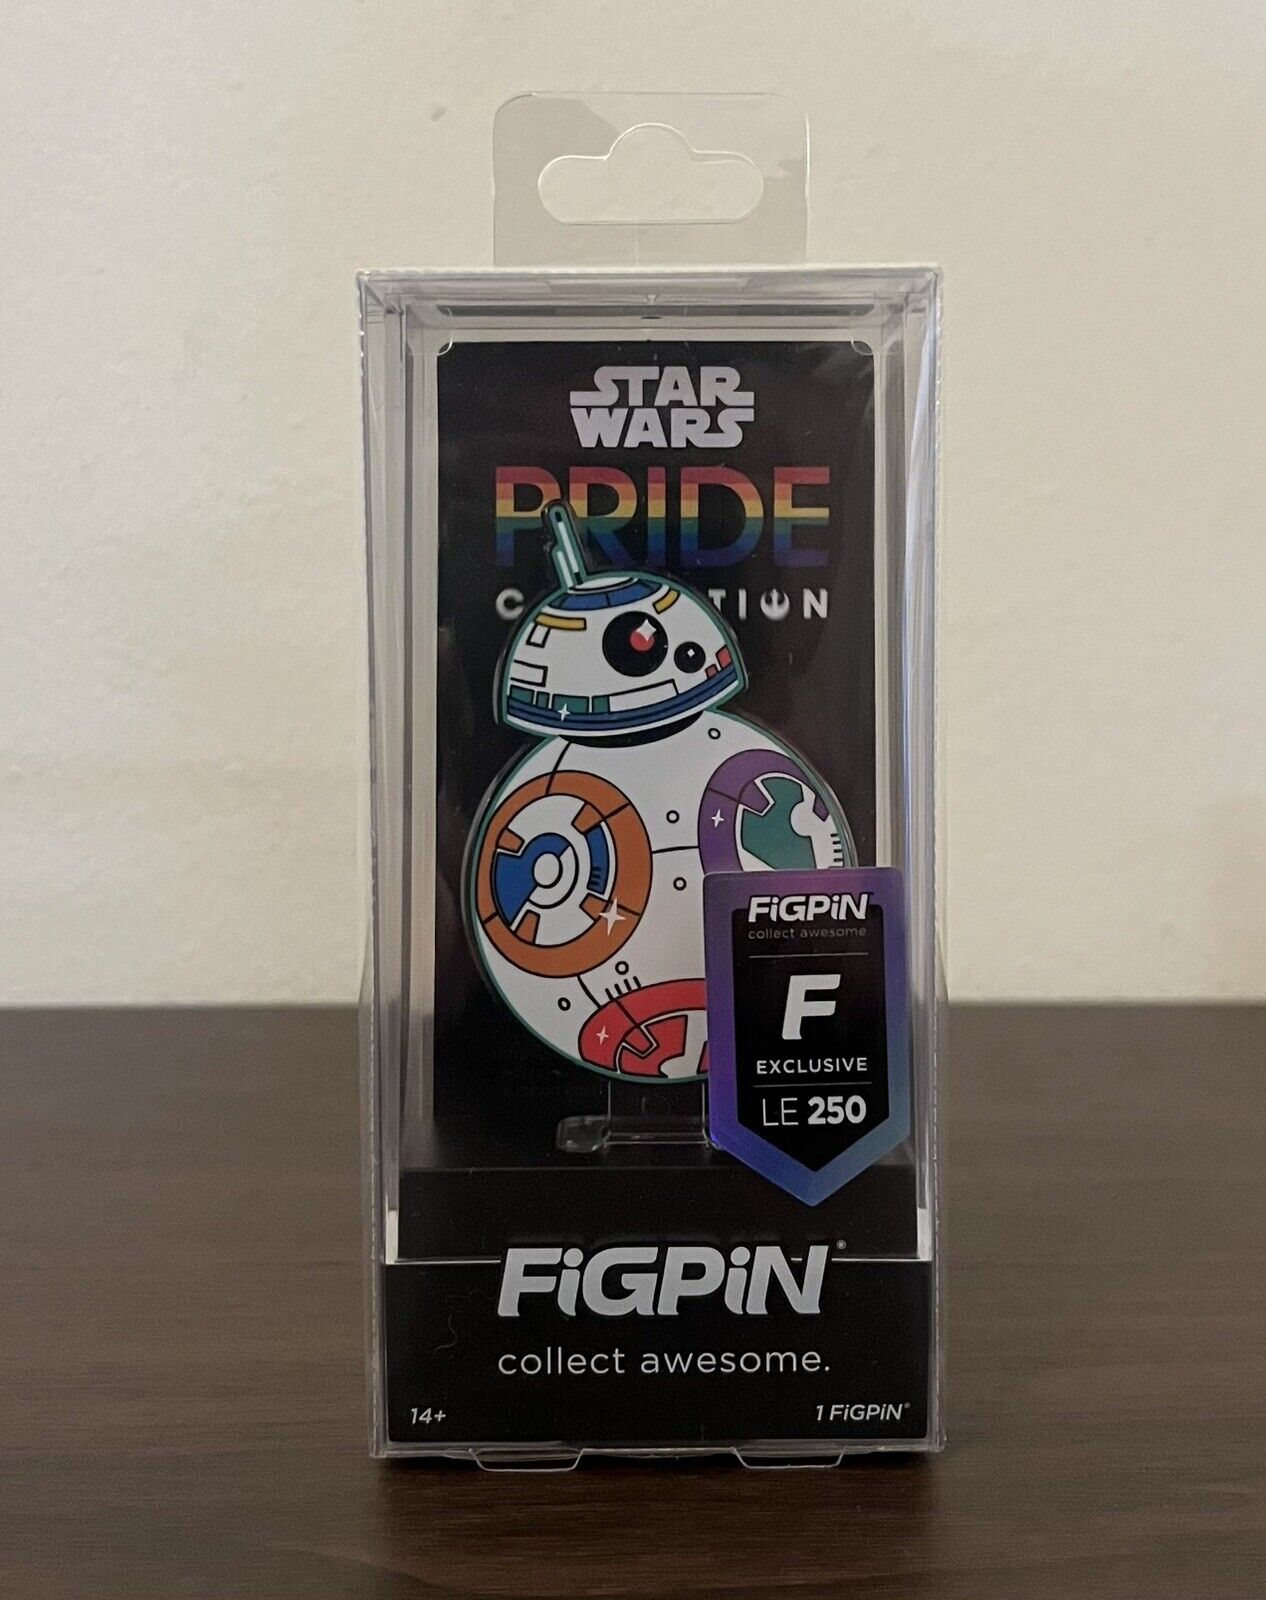 Figpin Star Wars Pride BB-8 #1697 Figpin Exclusive LE 250 NEW LOCKED IN HAND